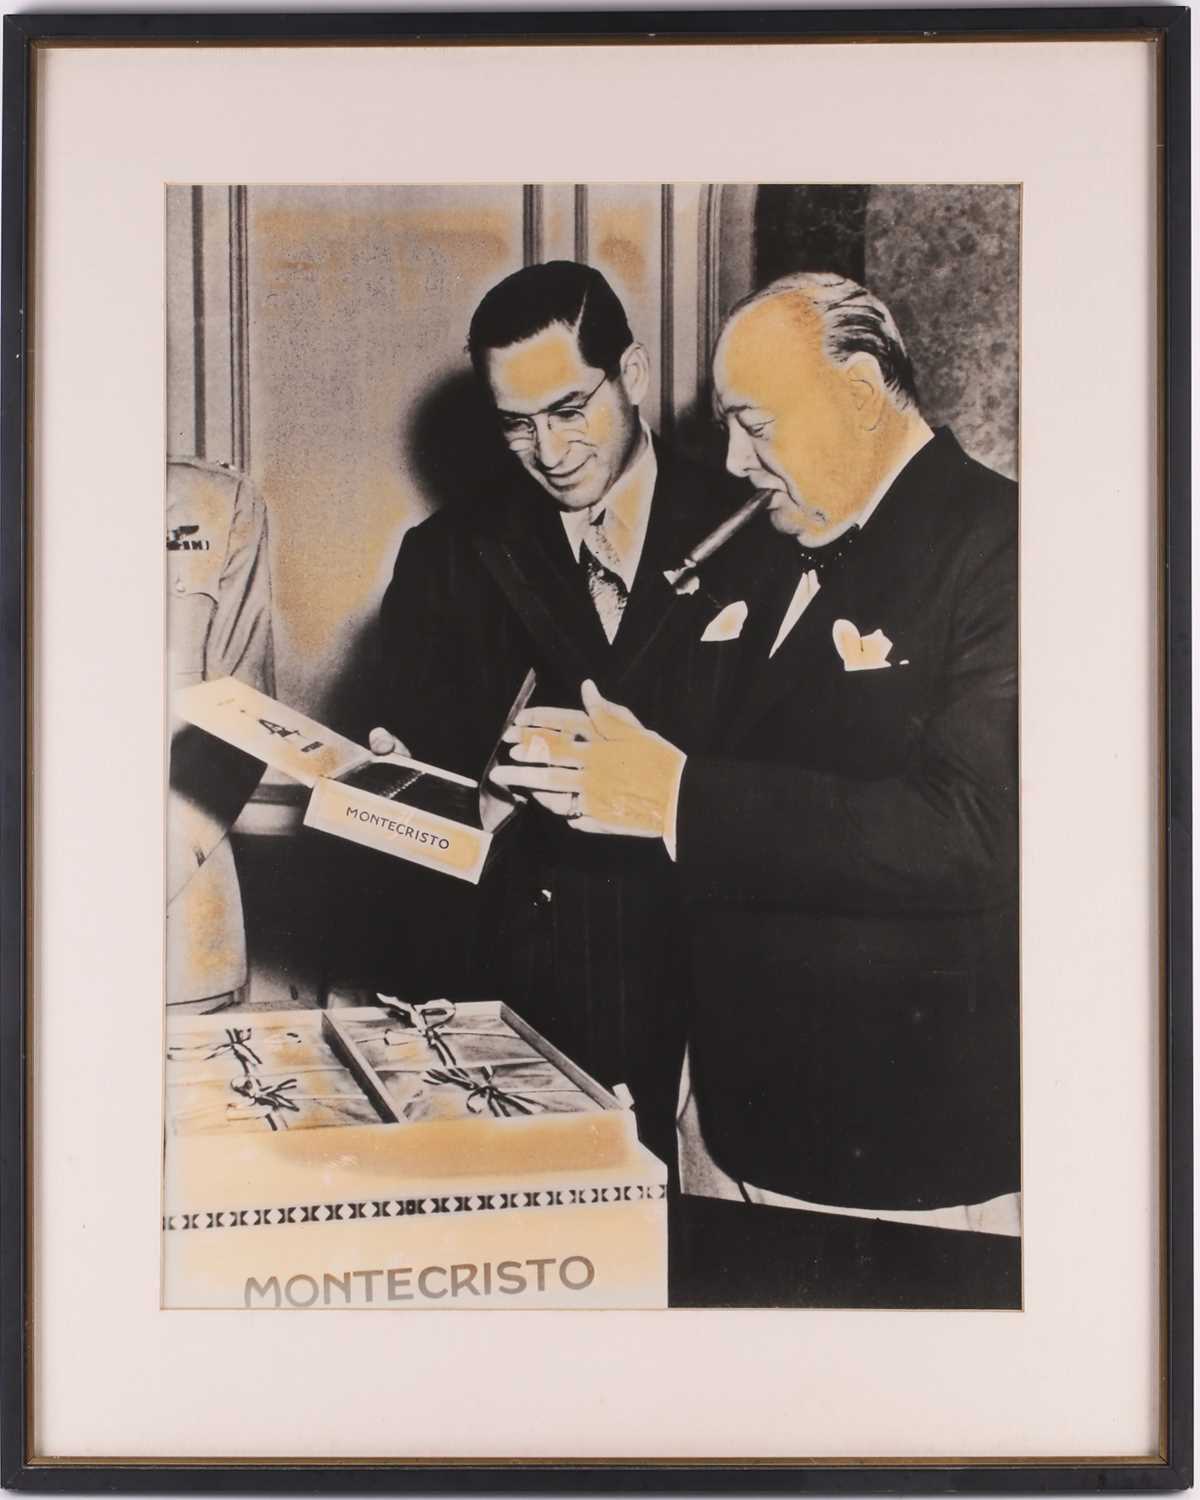 Of Winston Churchill/ Cigar interest. A vintage silver gelatin black and white photograph of Sir